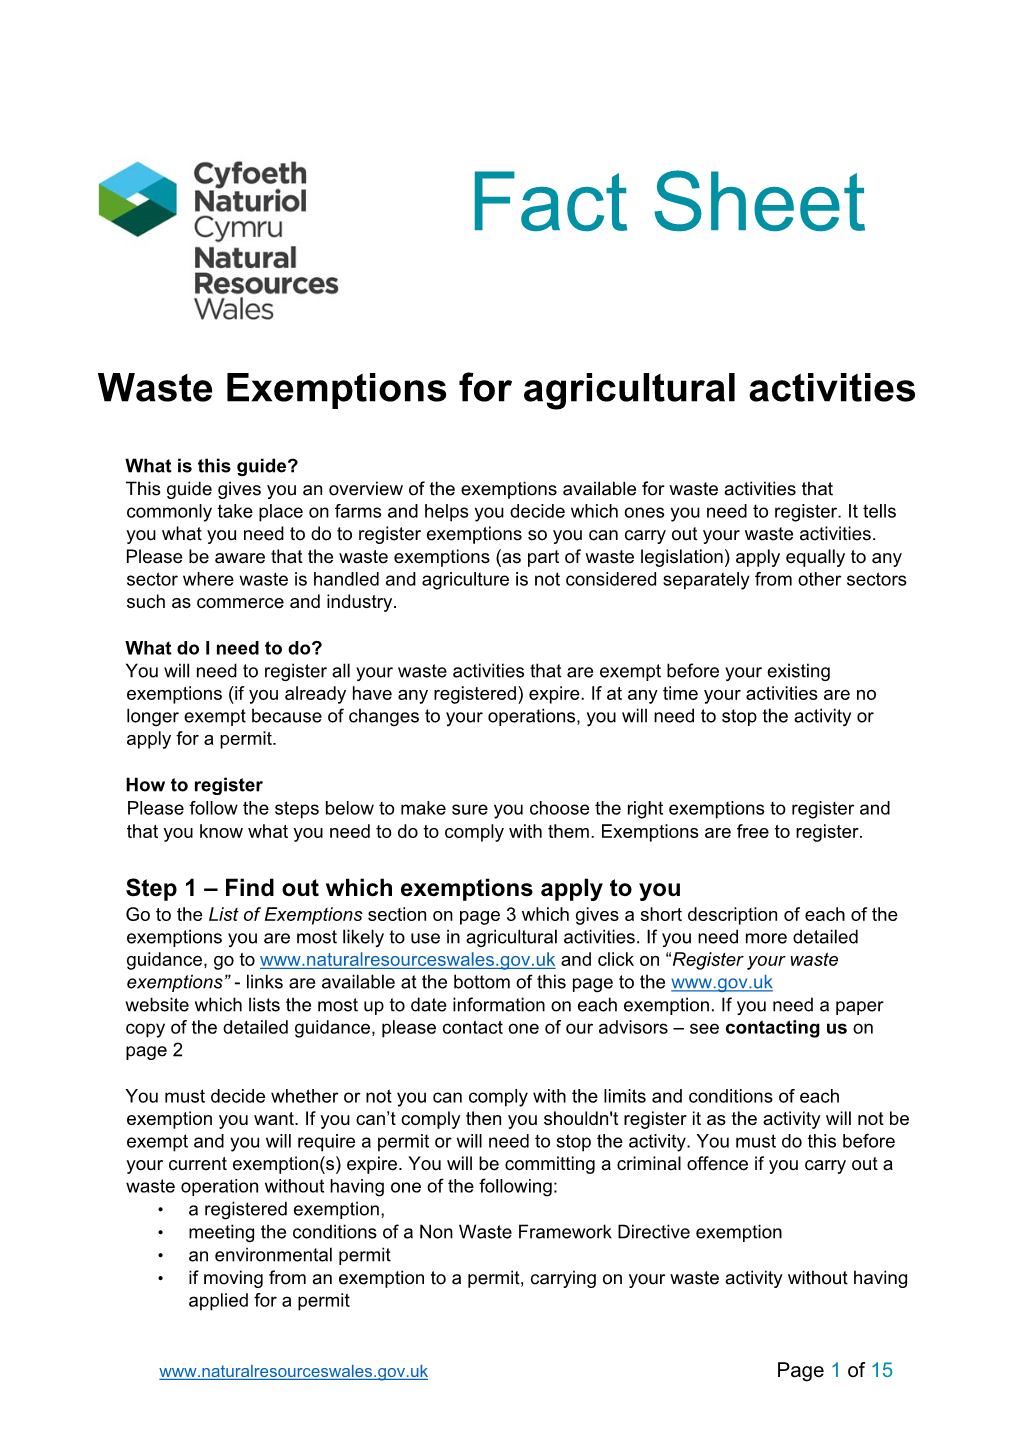 Fact Sheet for Agricultural Activities Involving Waste